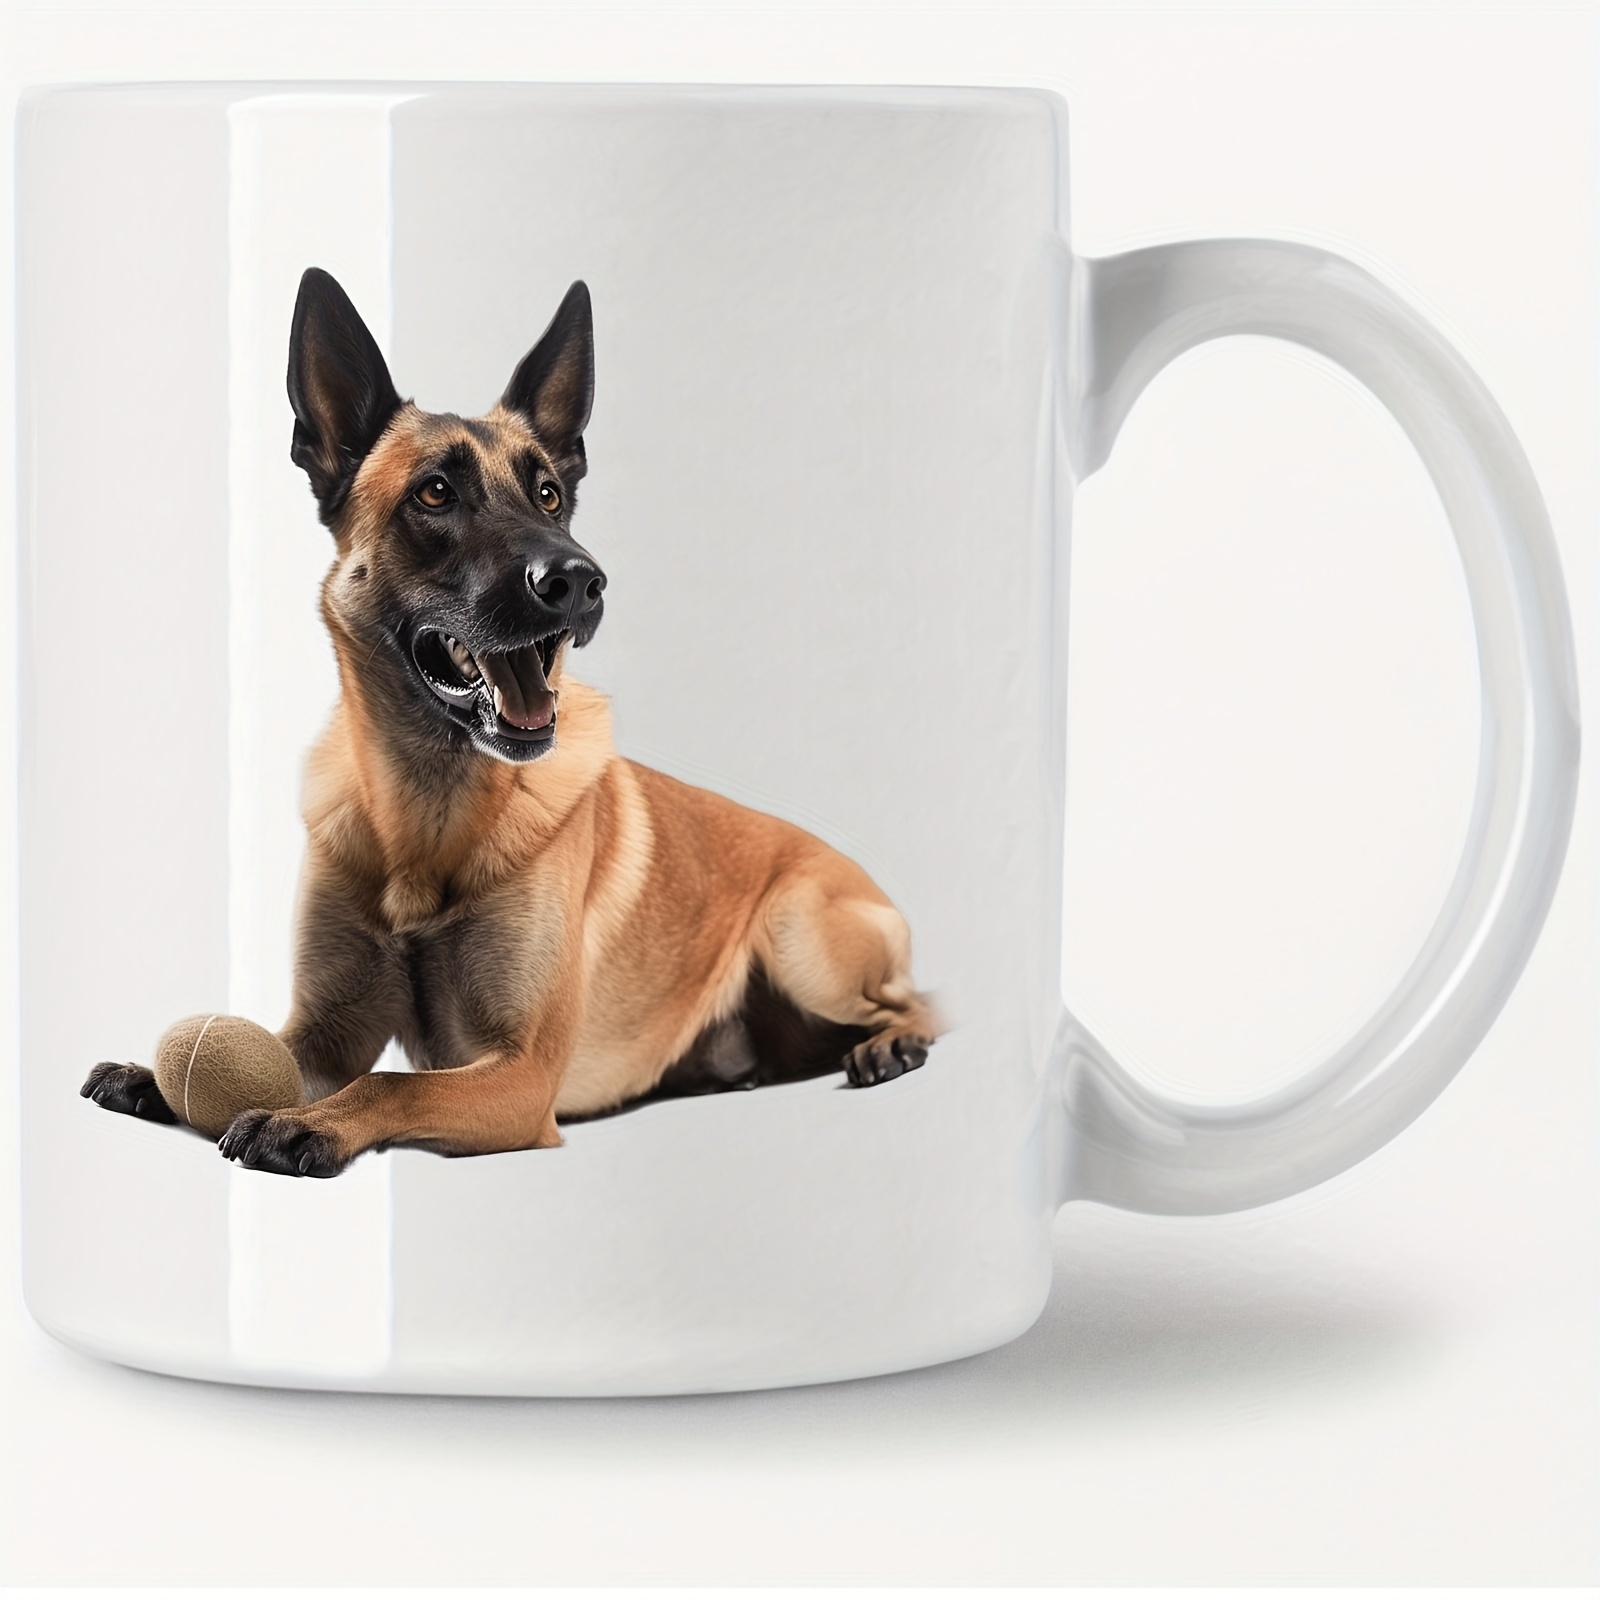 

1pc 11oz/330ml Mug For Cafe, Coffee Mug, Belgian Malinois, Gift For Friends, Sisters, Colleagues, Family, Coffee Drinker, Owner, Ceramic Cup, Holiday Gift